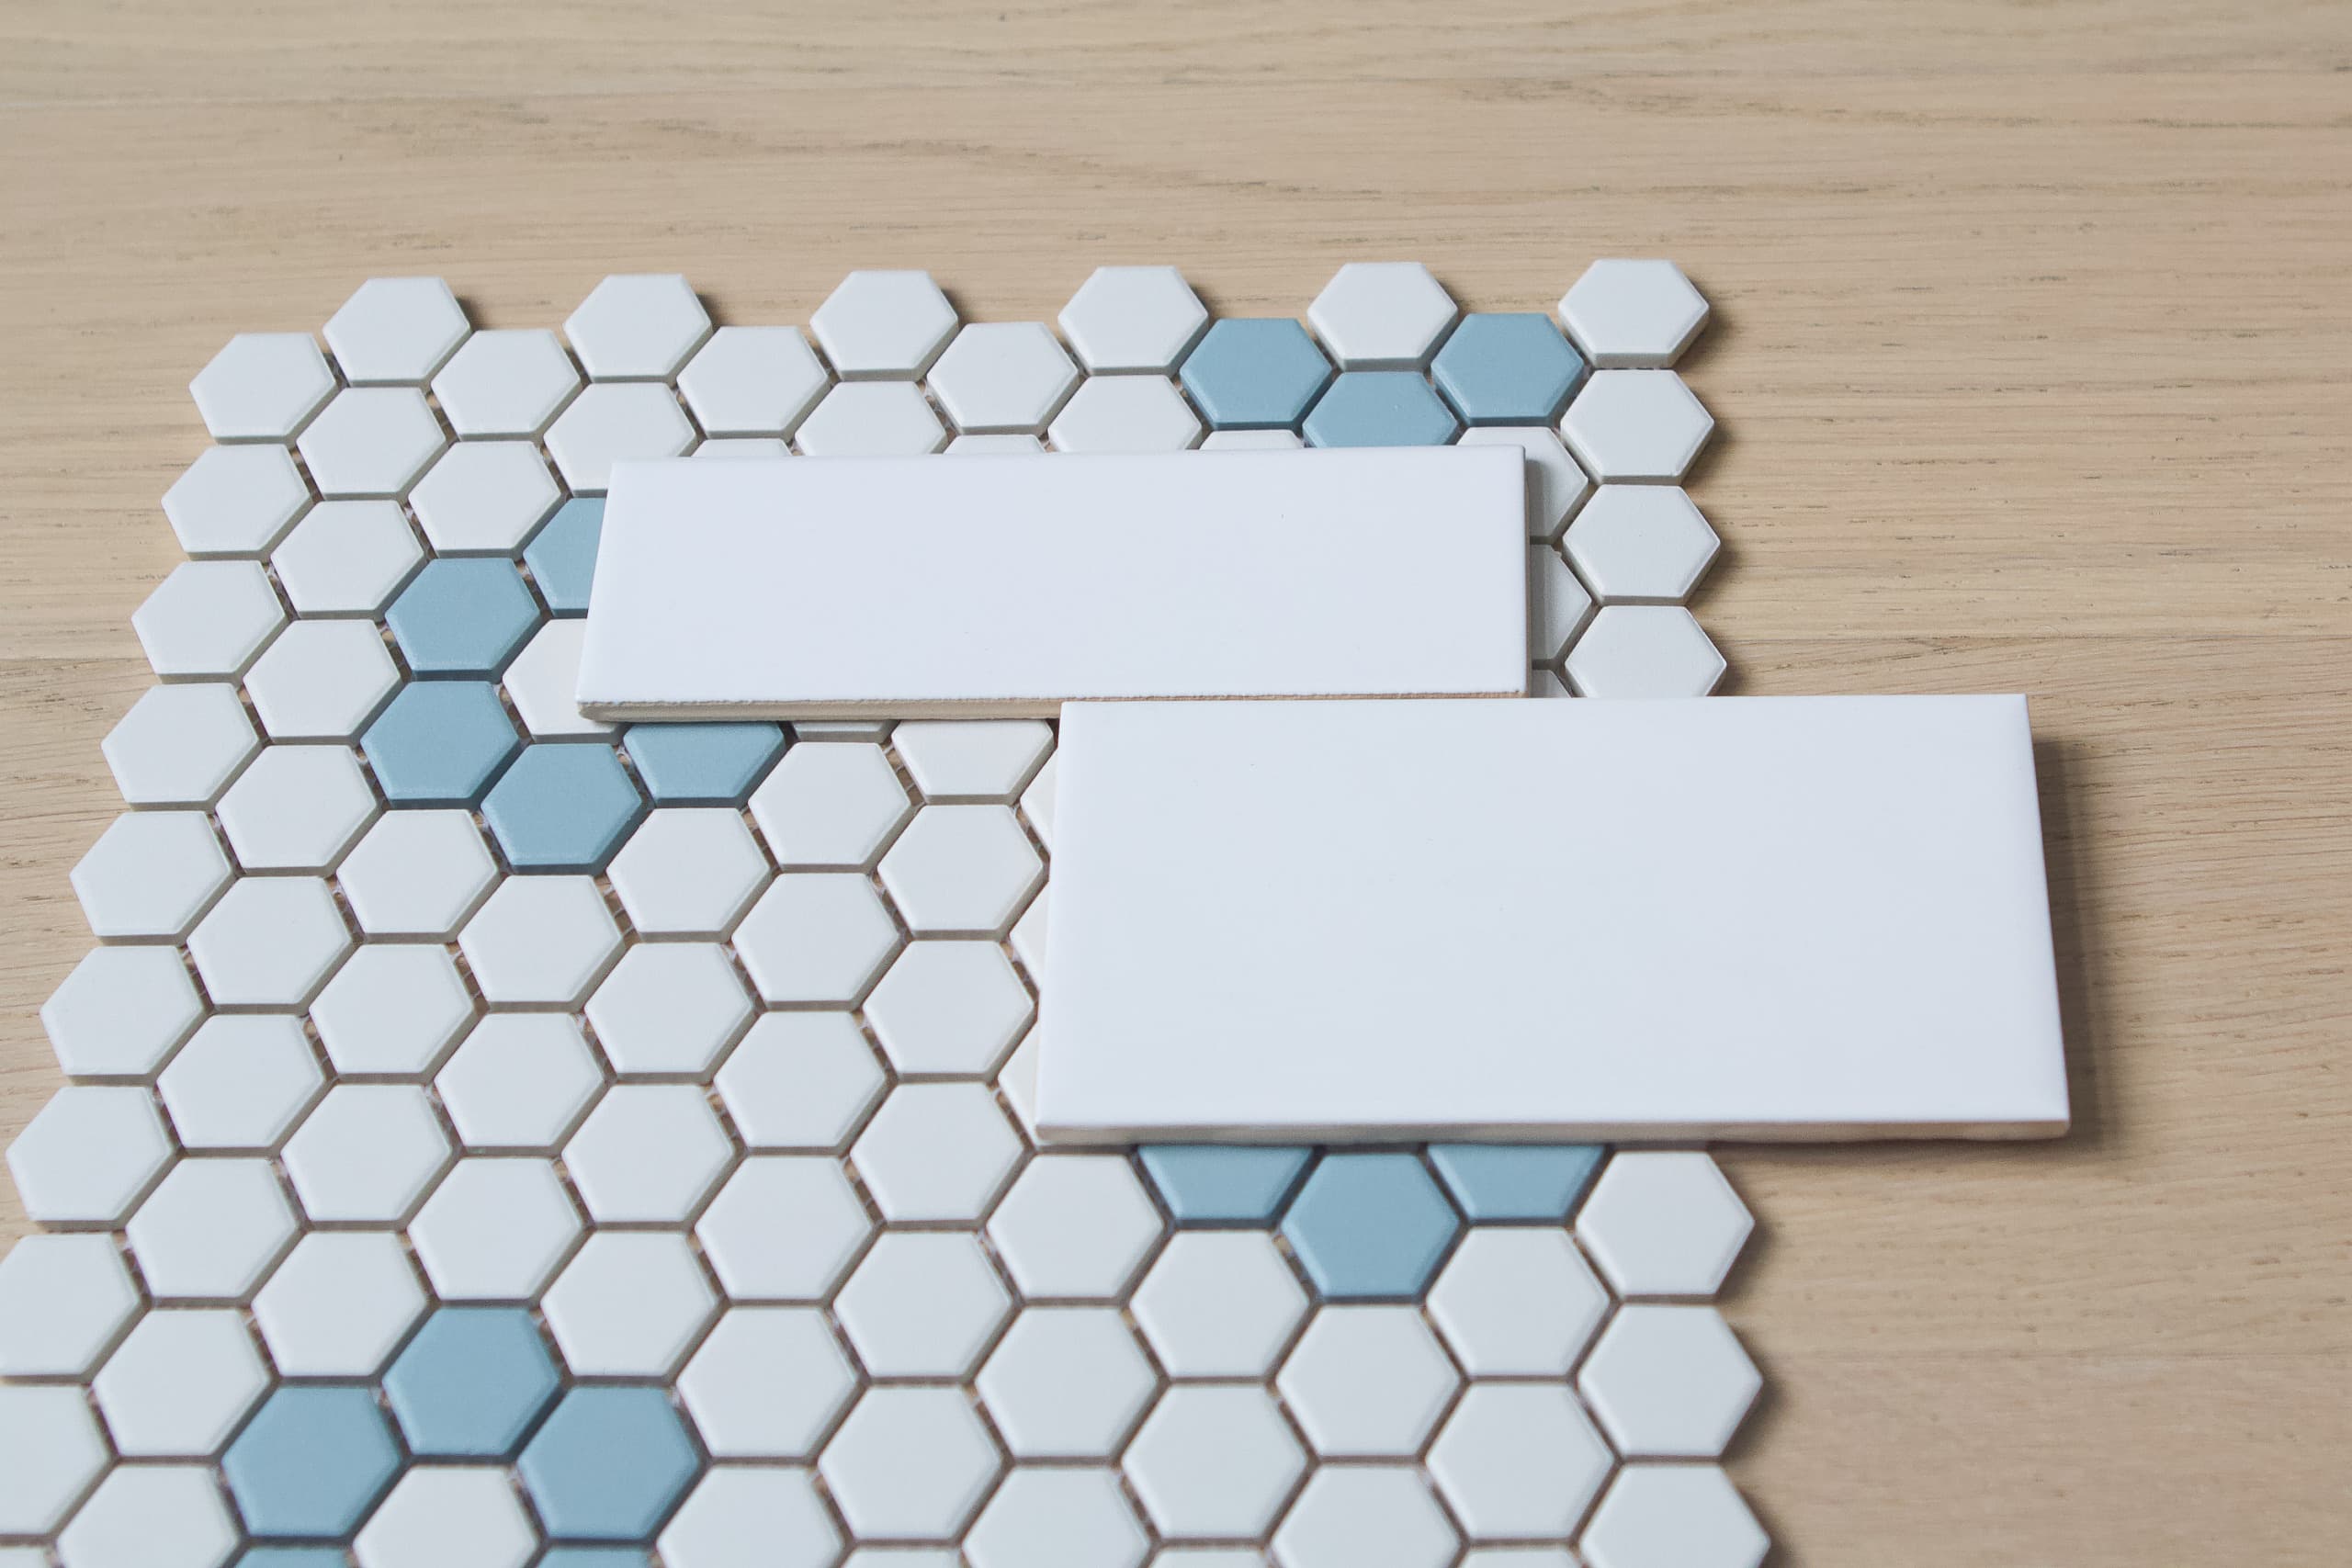 Choosing the right kids' bathroom tile for our home